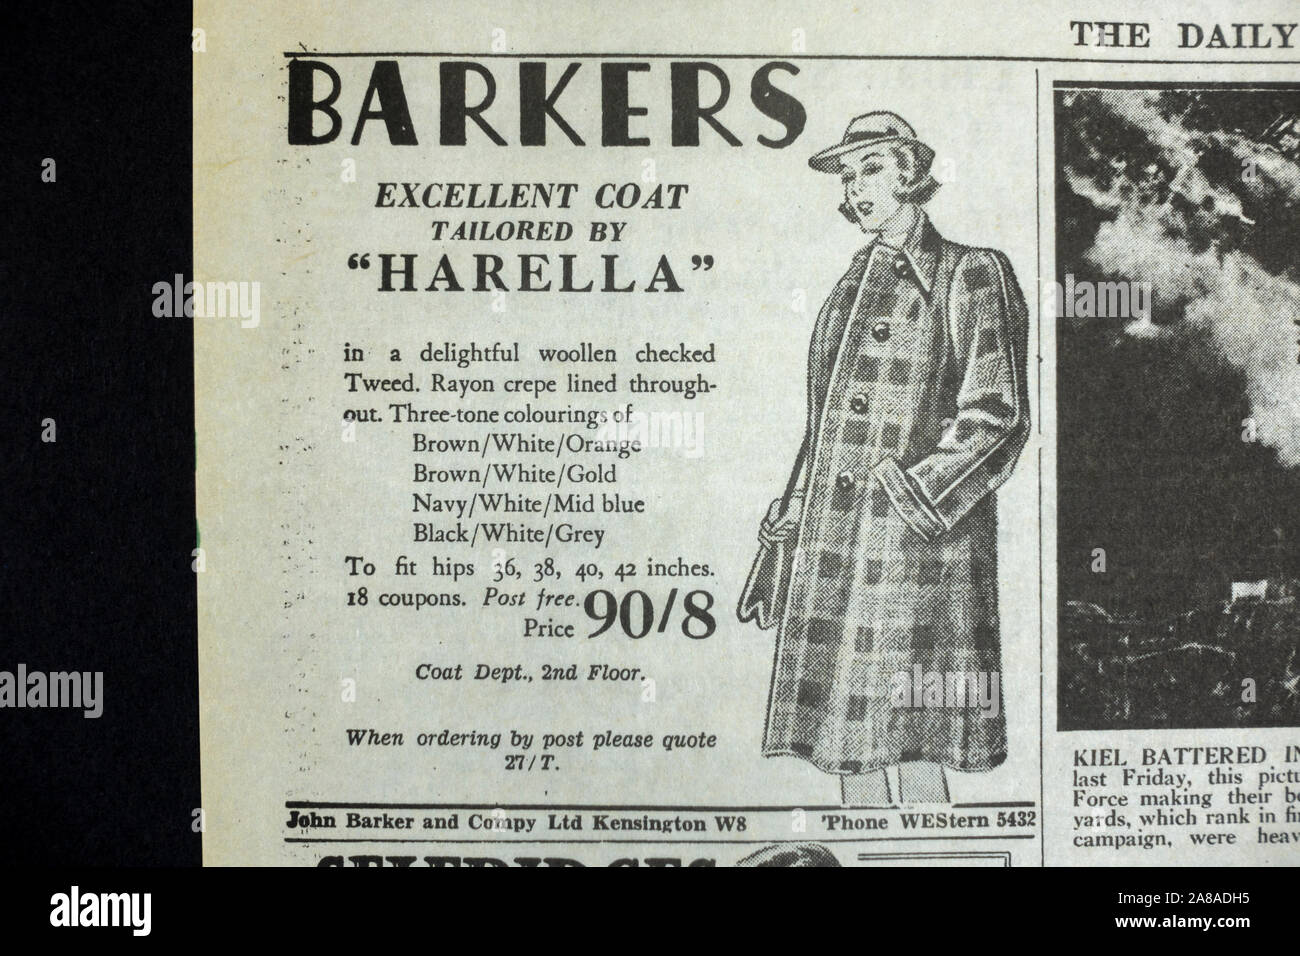 Advert for Barkers of Kensington (and their Harella tailored coat), The Daily Telegraph (replica), 18th May 1943, the day after the Dam Busters raid. Stock Photo